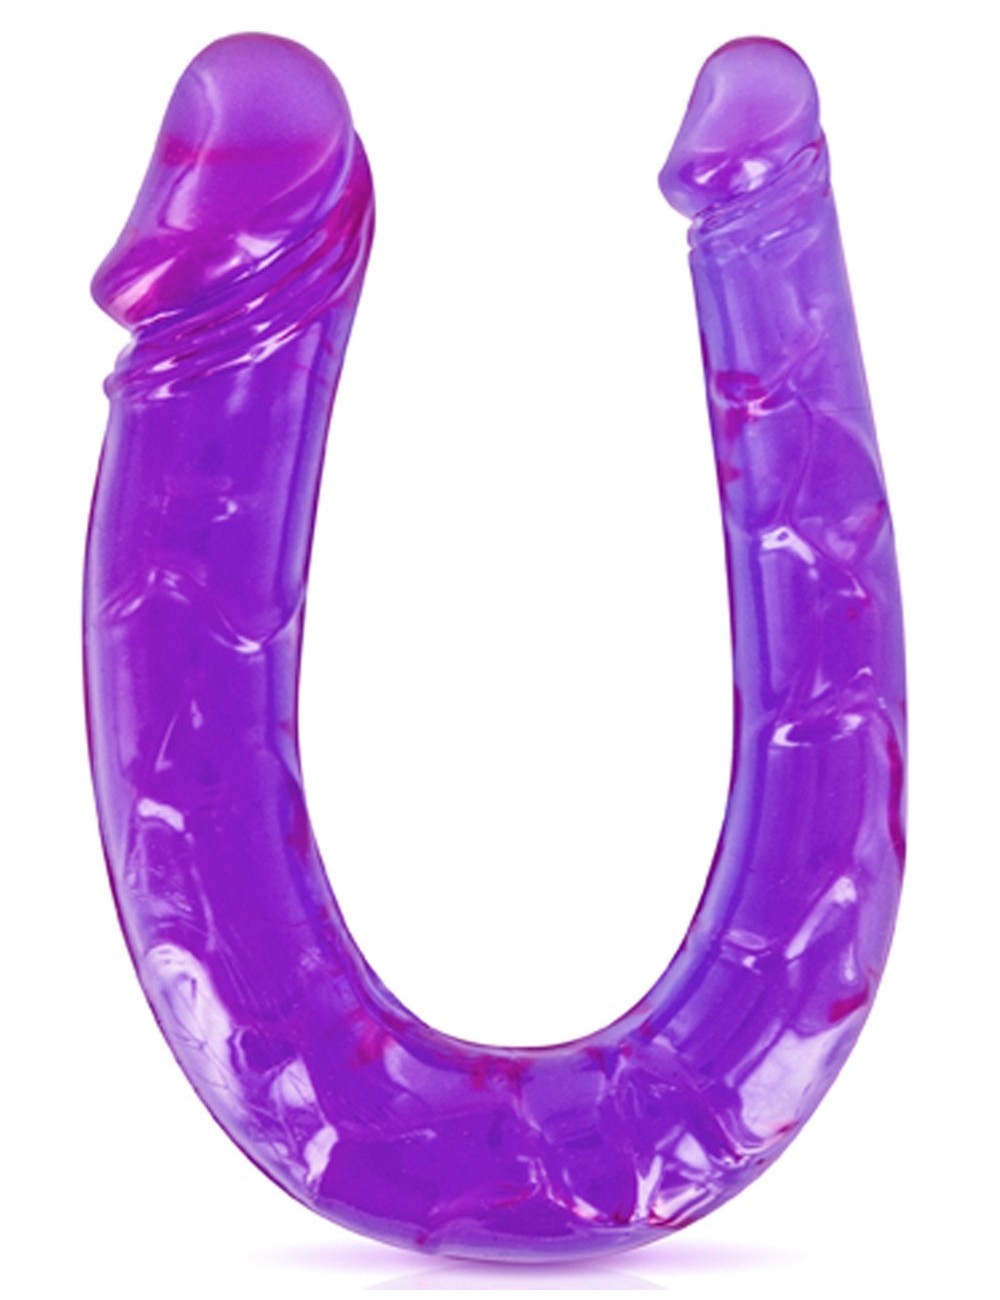 Sextoys - Double Dong - Double dong gode fléxible violet 29.5cm - CC570045 - Glamy